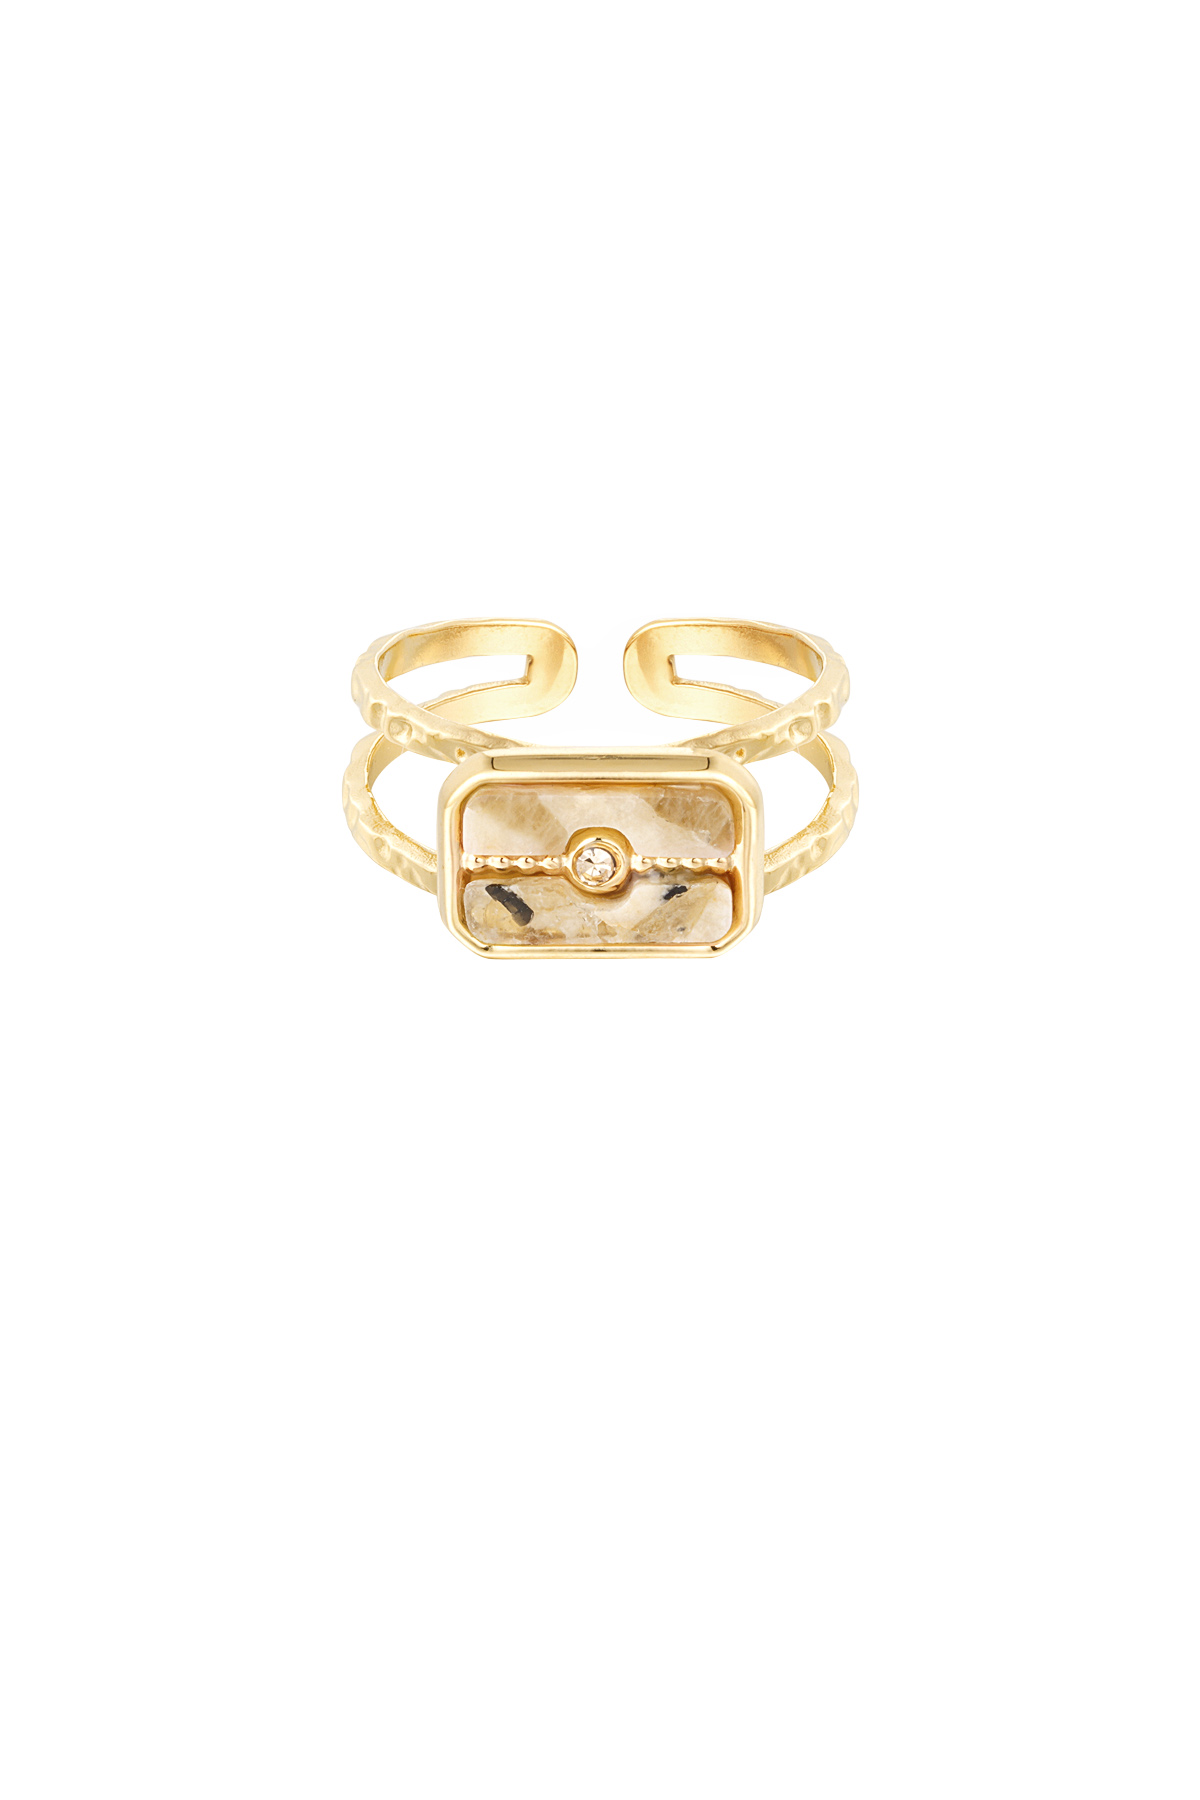 Ring decorated stone - gold/beige 